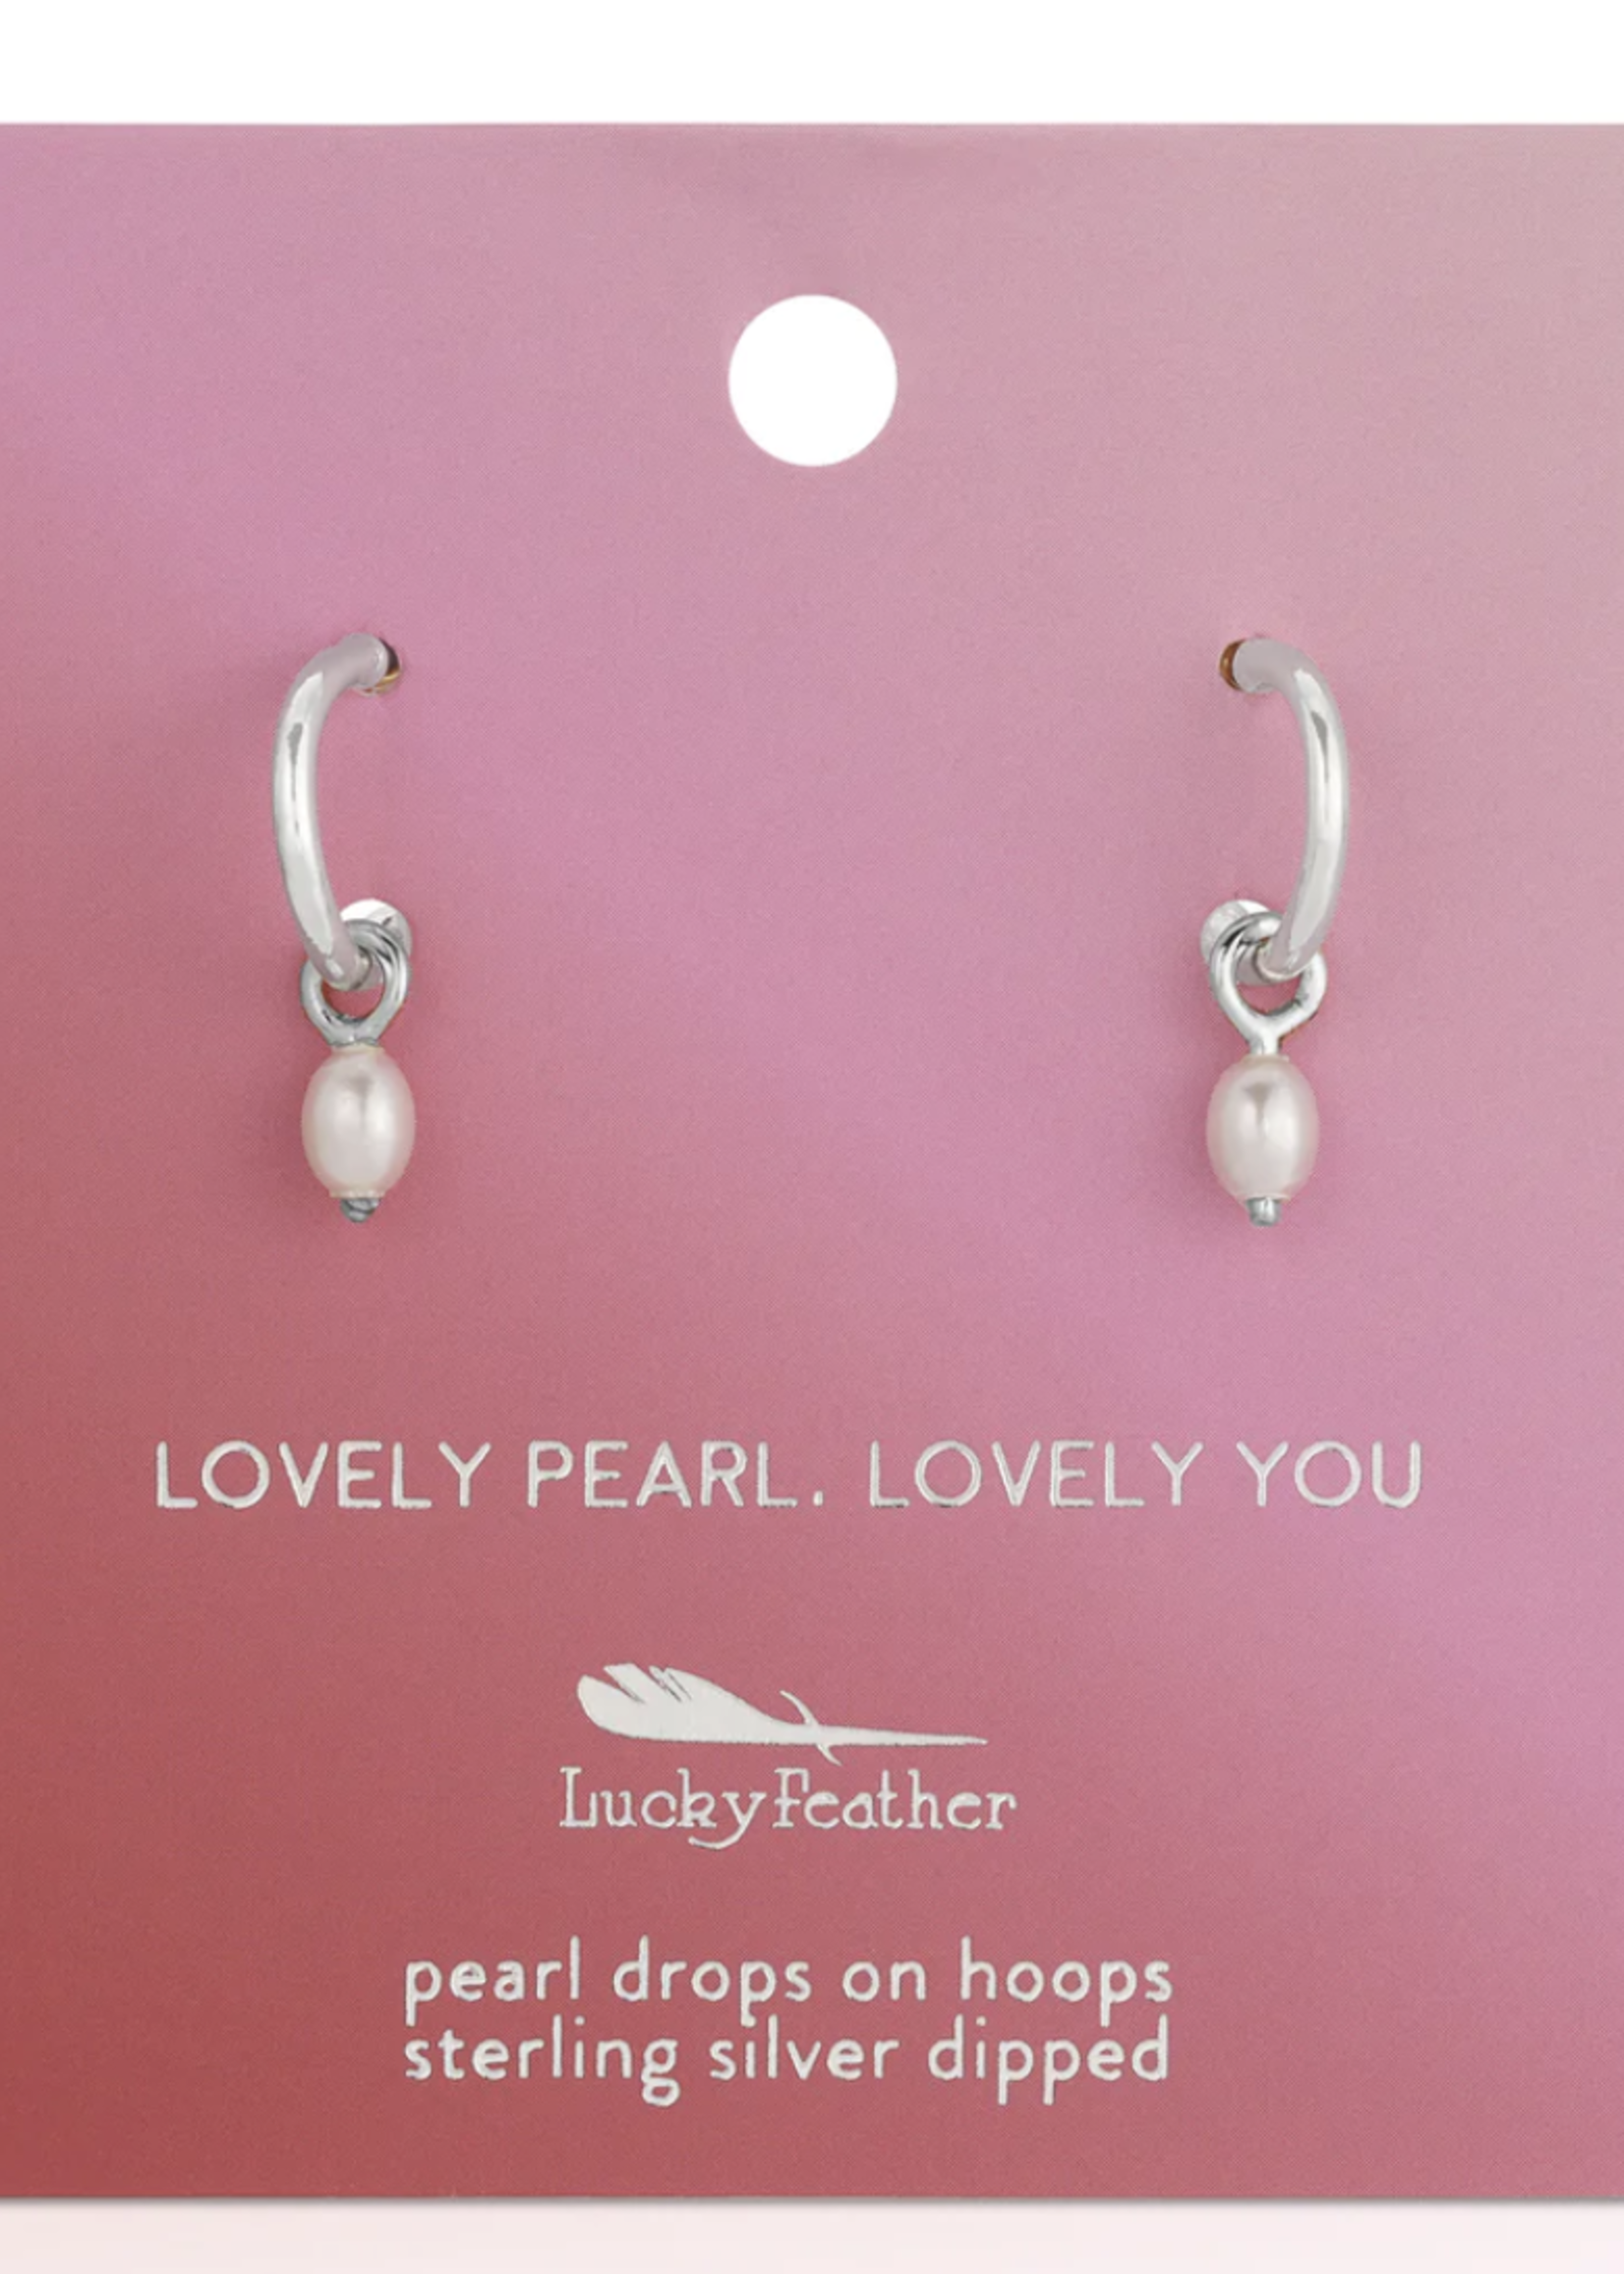 lucky feather Drop Hoops